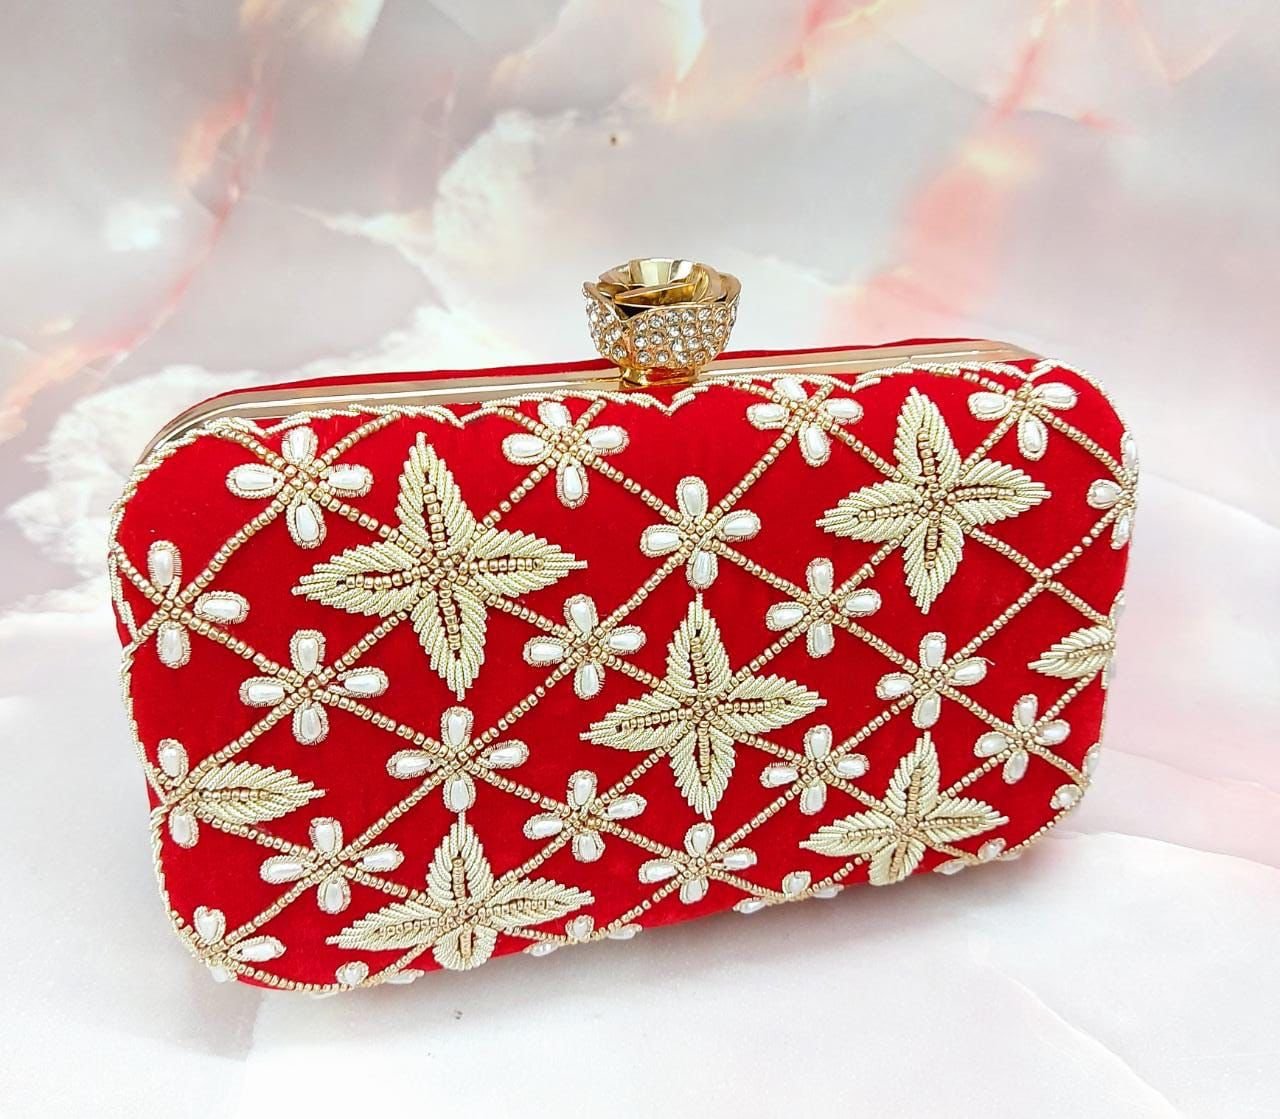 Buy White Pearl Clutch Bag White Evening Bag White Bridal Purse Pearl Bag  White Wedding Clutch Bag With Long Detachable Gold Chain Strap Online in  India - Etsy